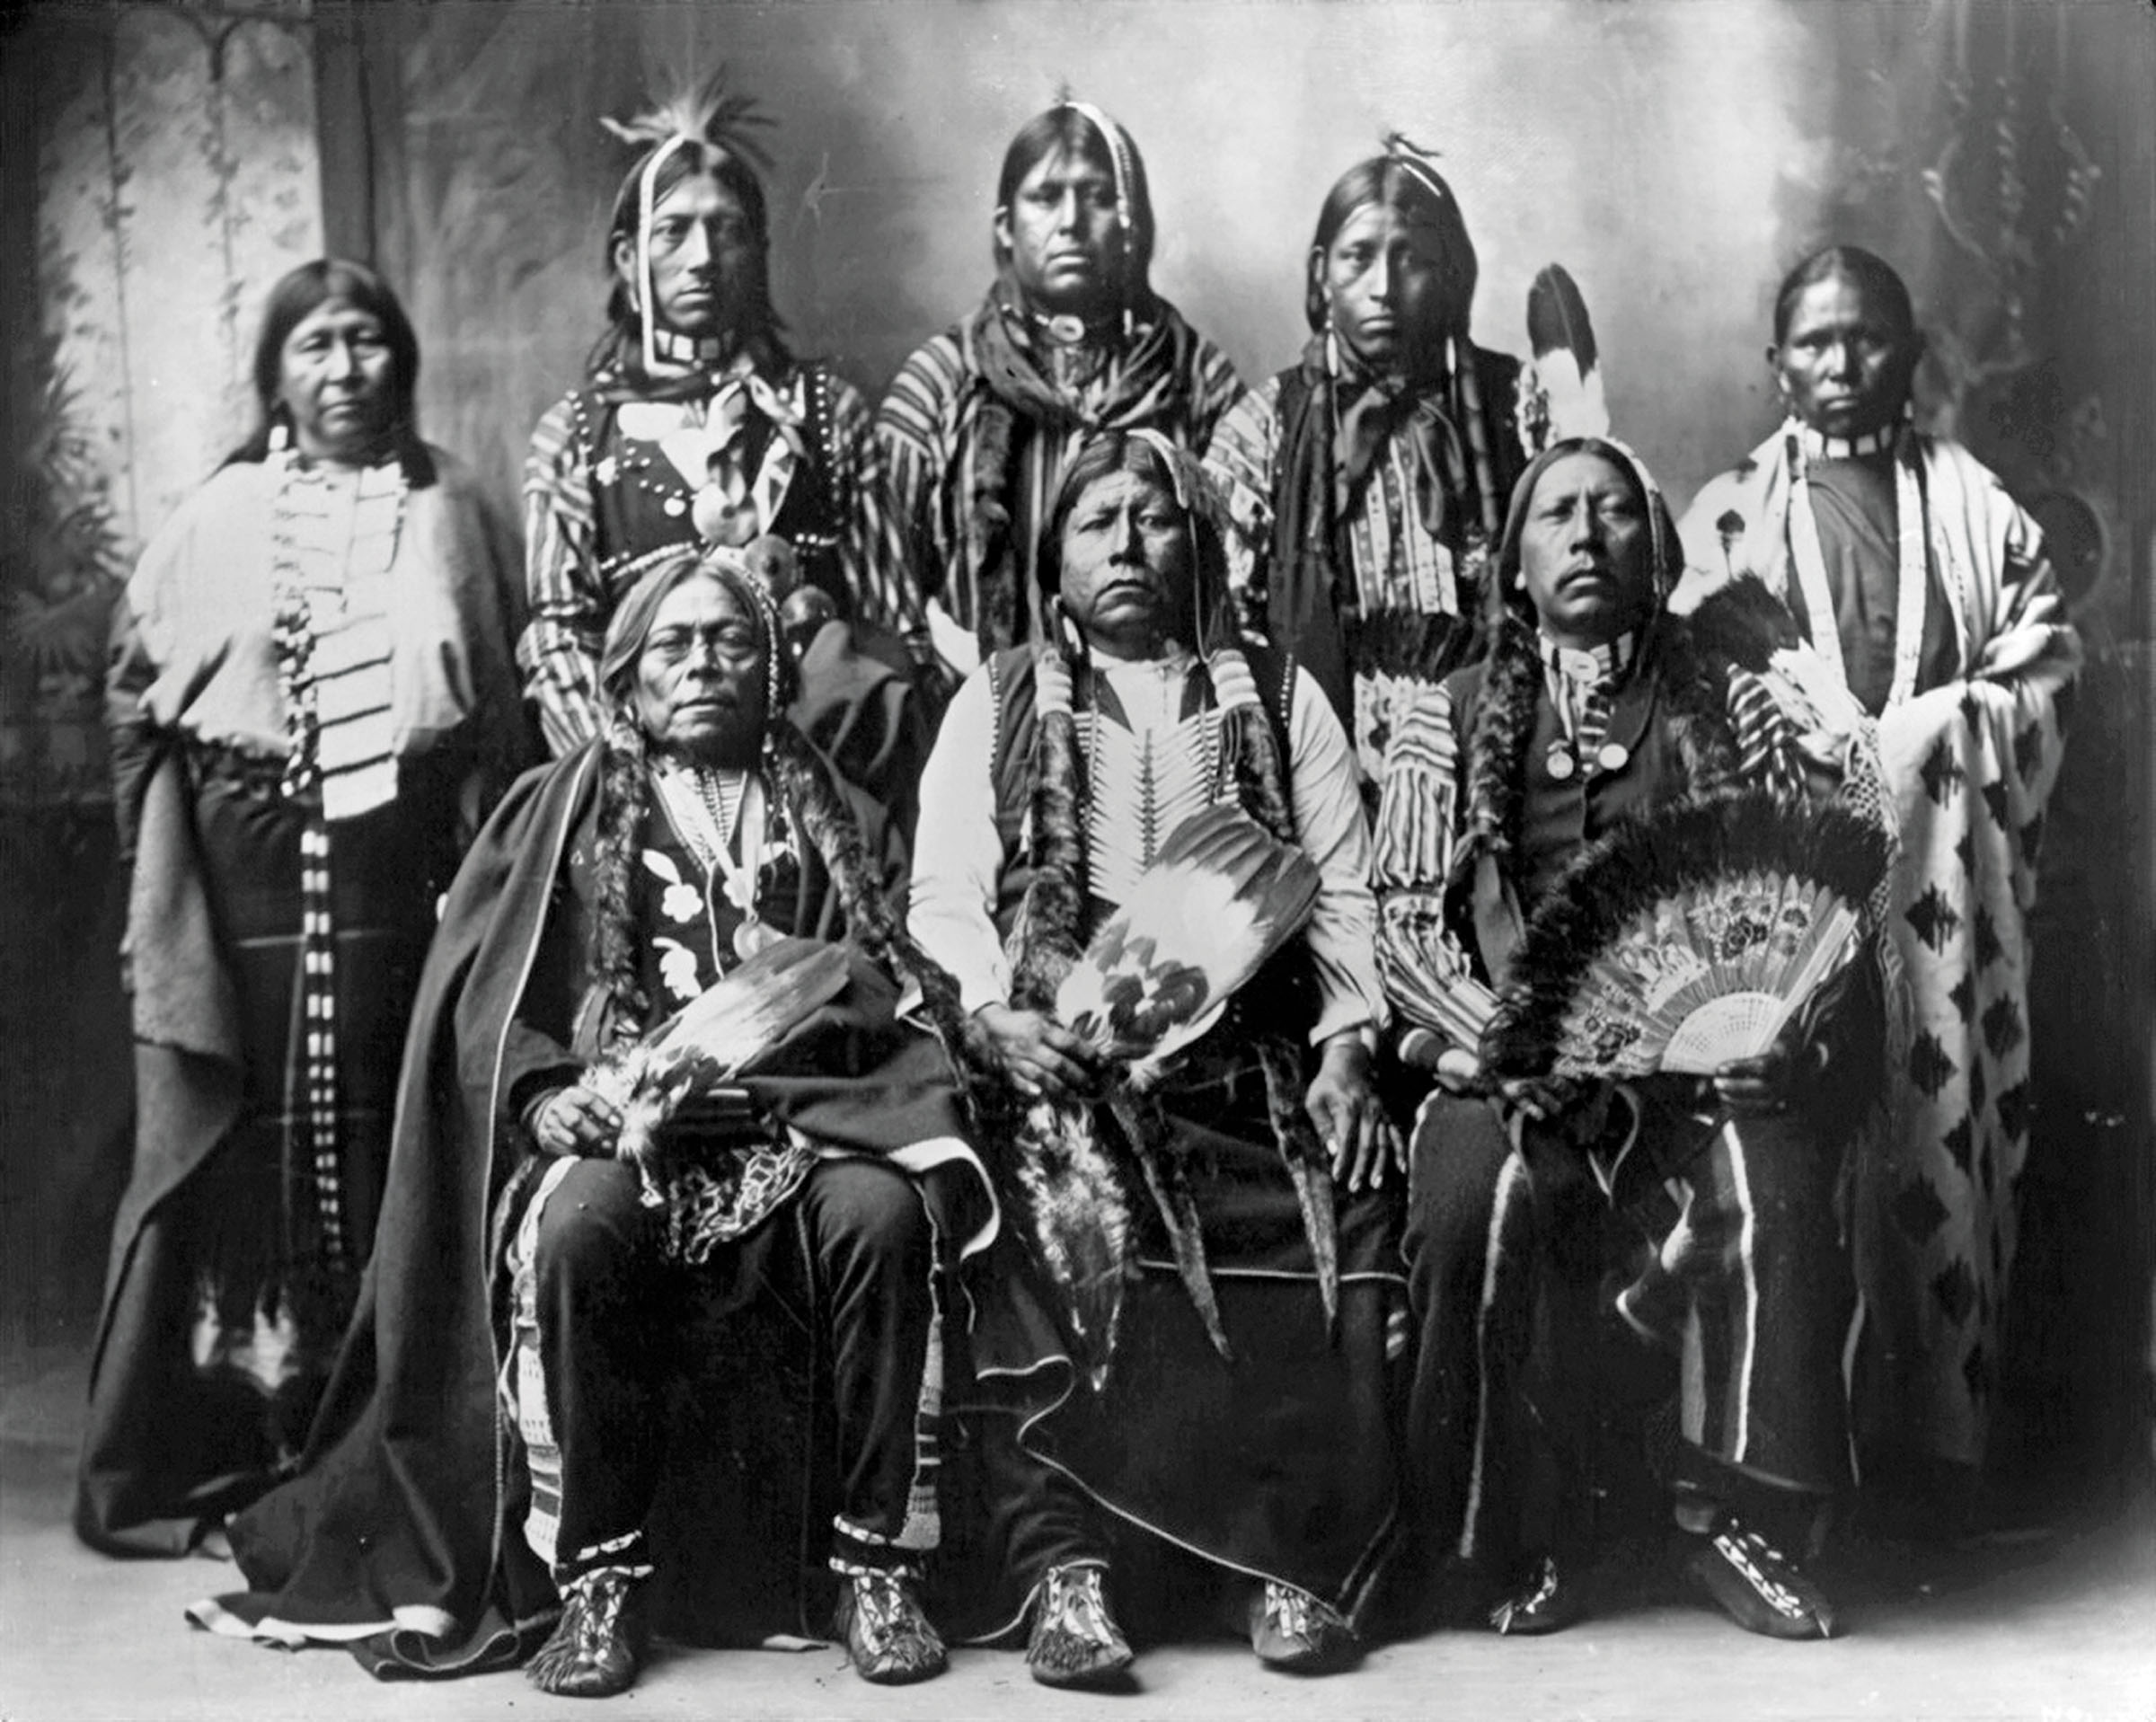 A black and white photograph of a group of Native Americans wearing traditional attire 